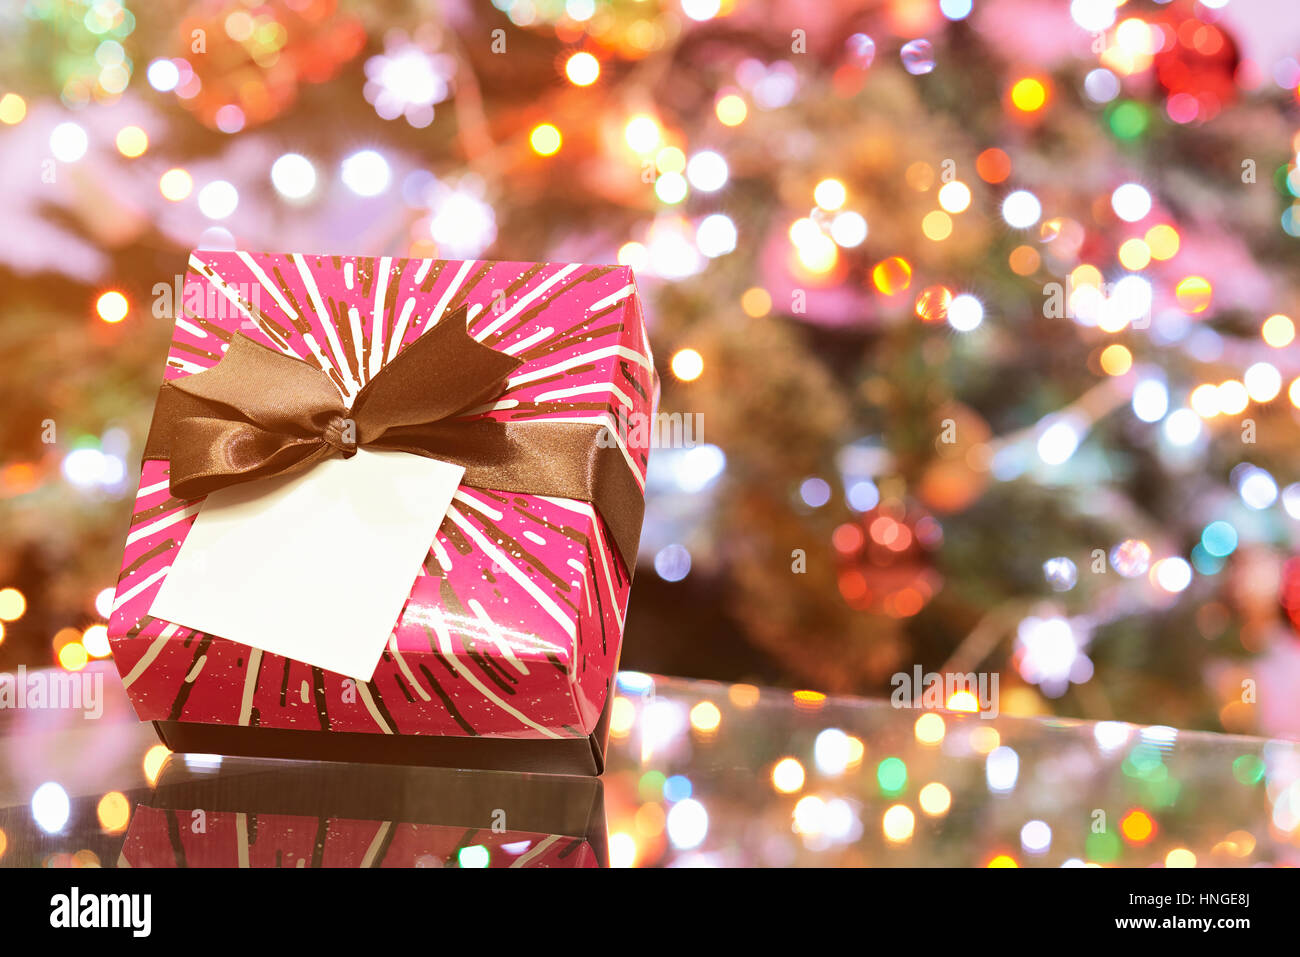 pink colorful gift box for christmas evening on blurred light background Stock Photo